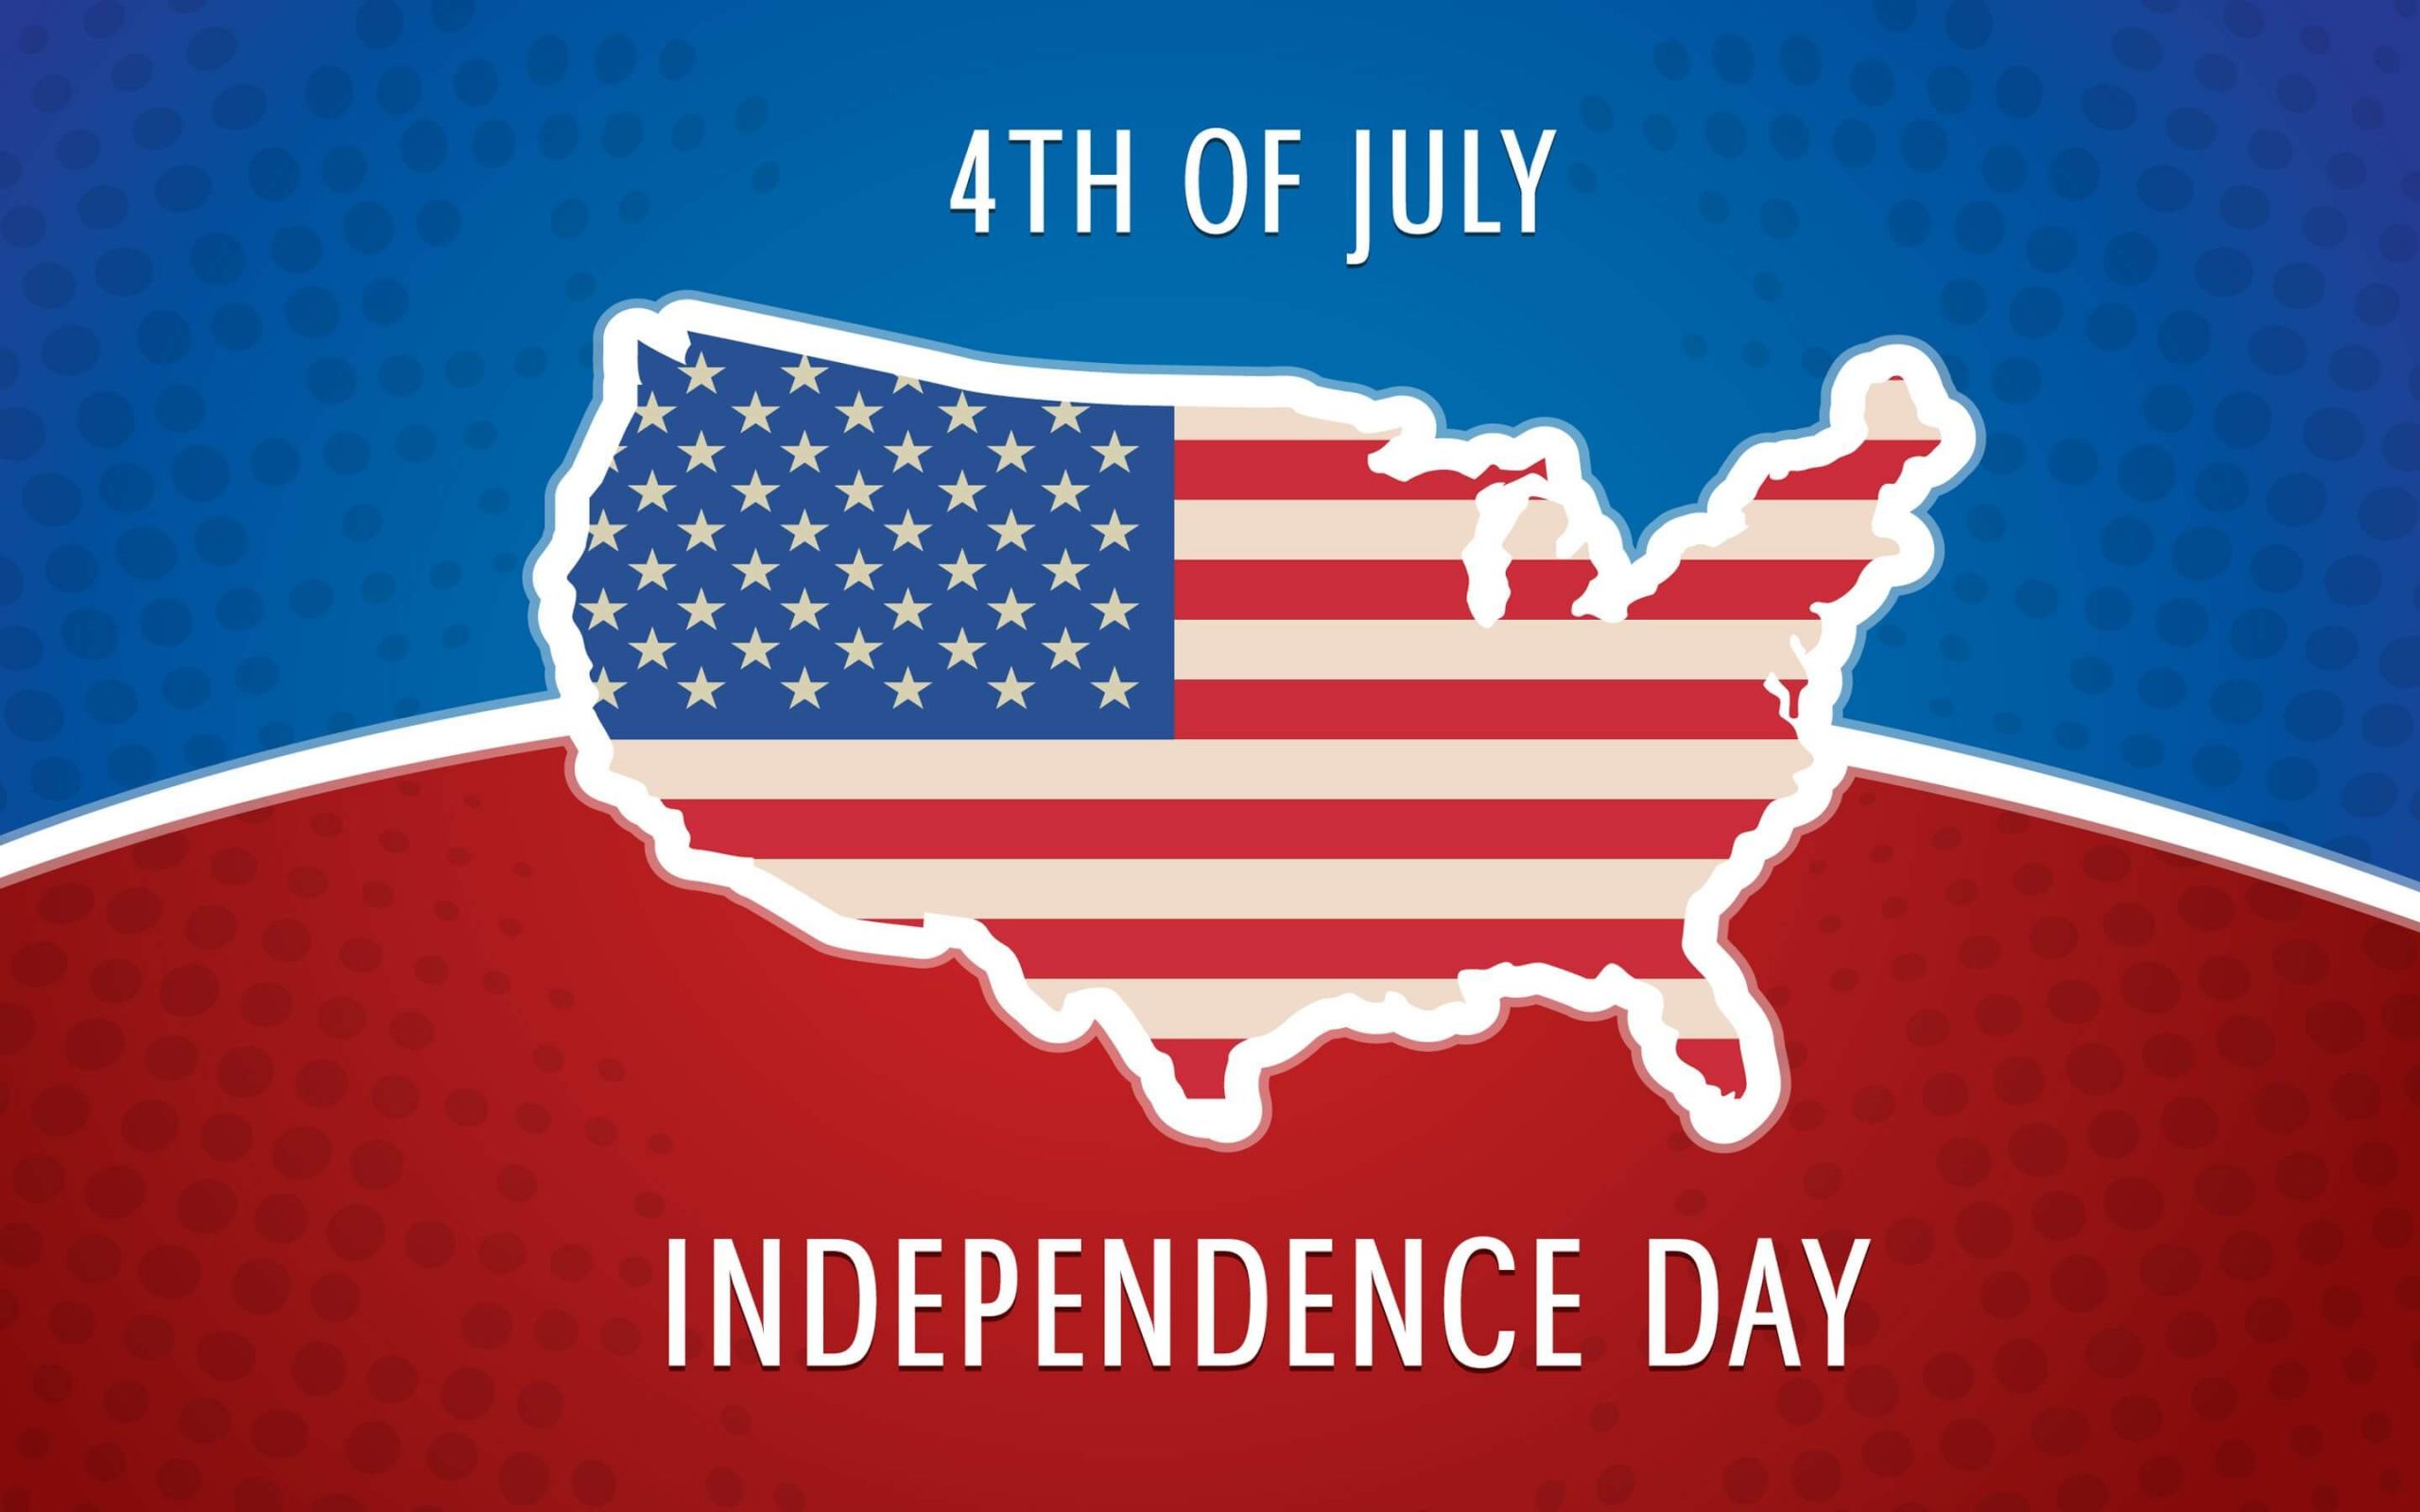 July 4th Independence Day Quotes
 July 4th Independence Day Quotes